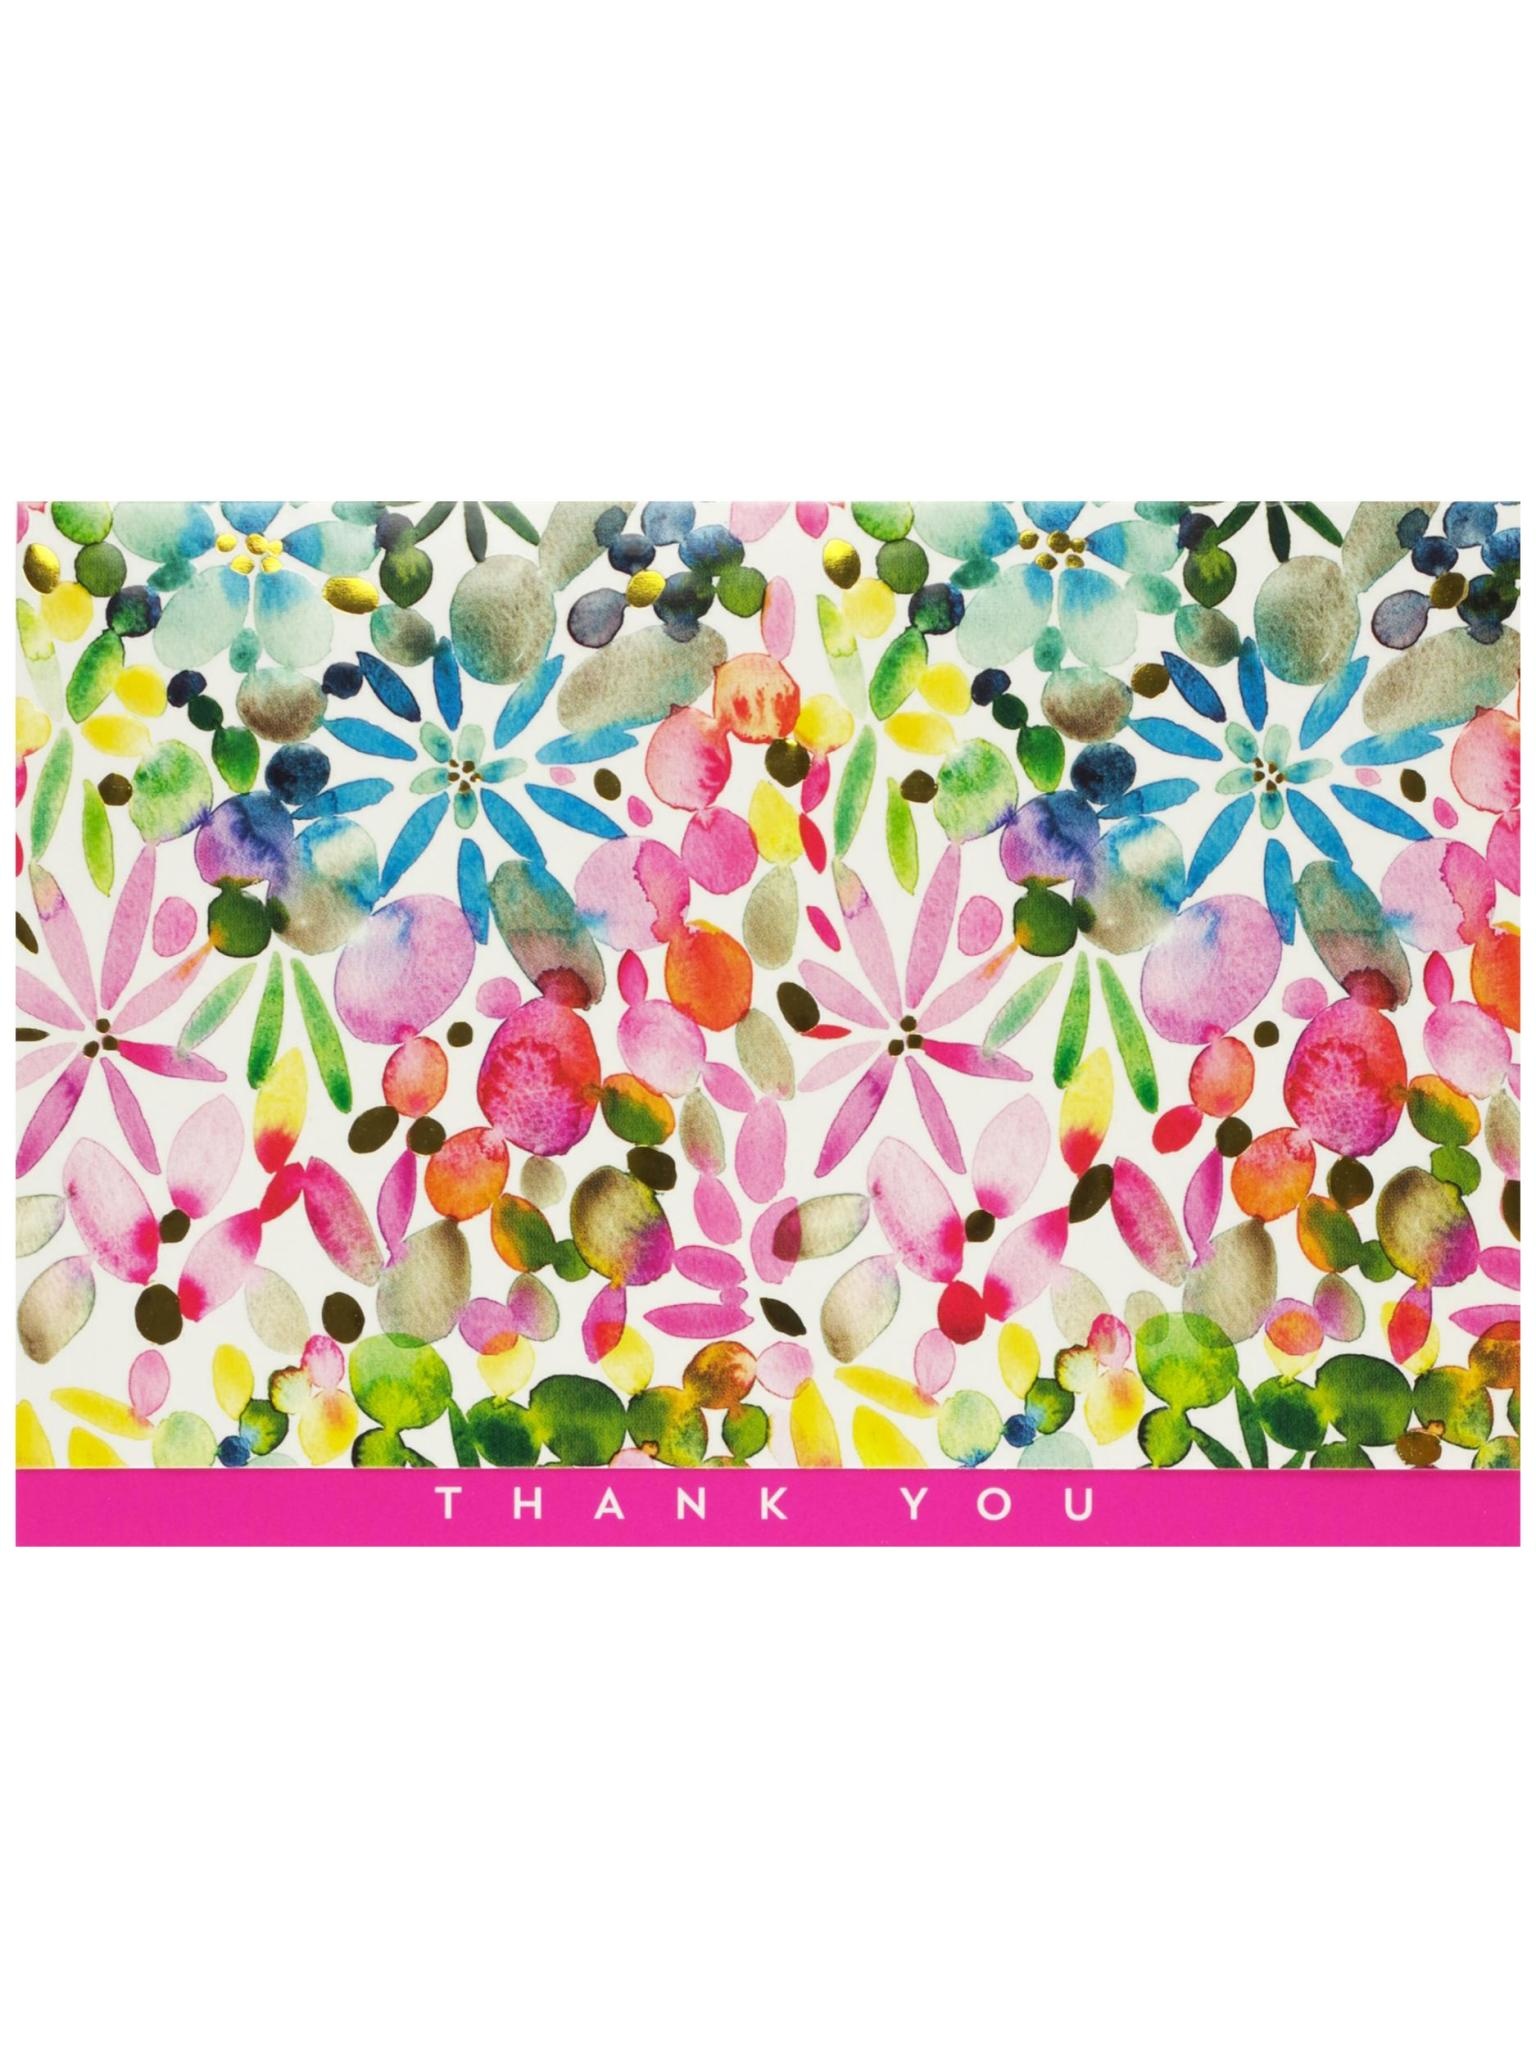 Peter Pauper Watercolor Garden Boxed Thank You Cards